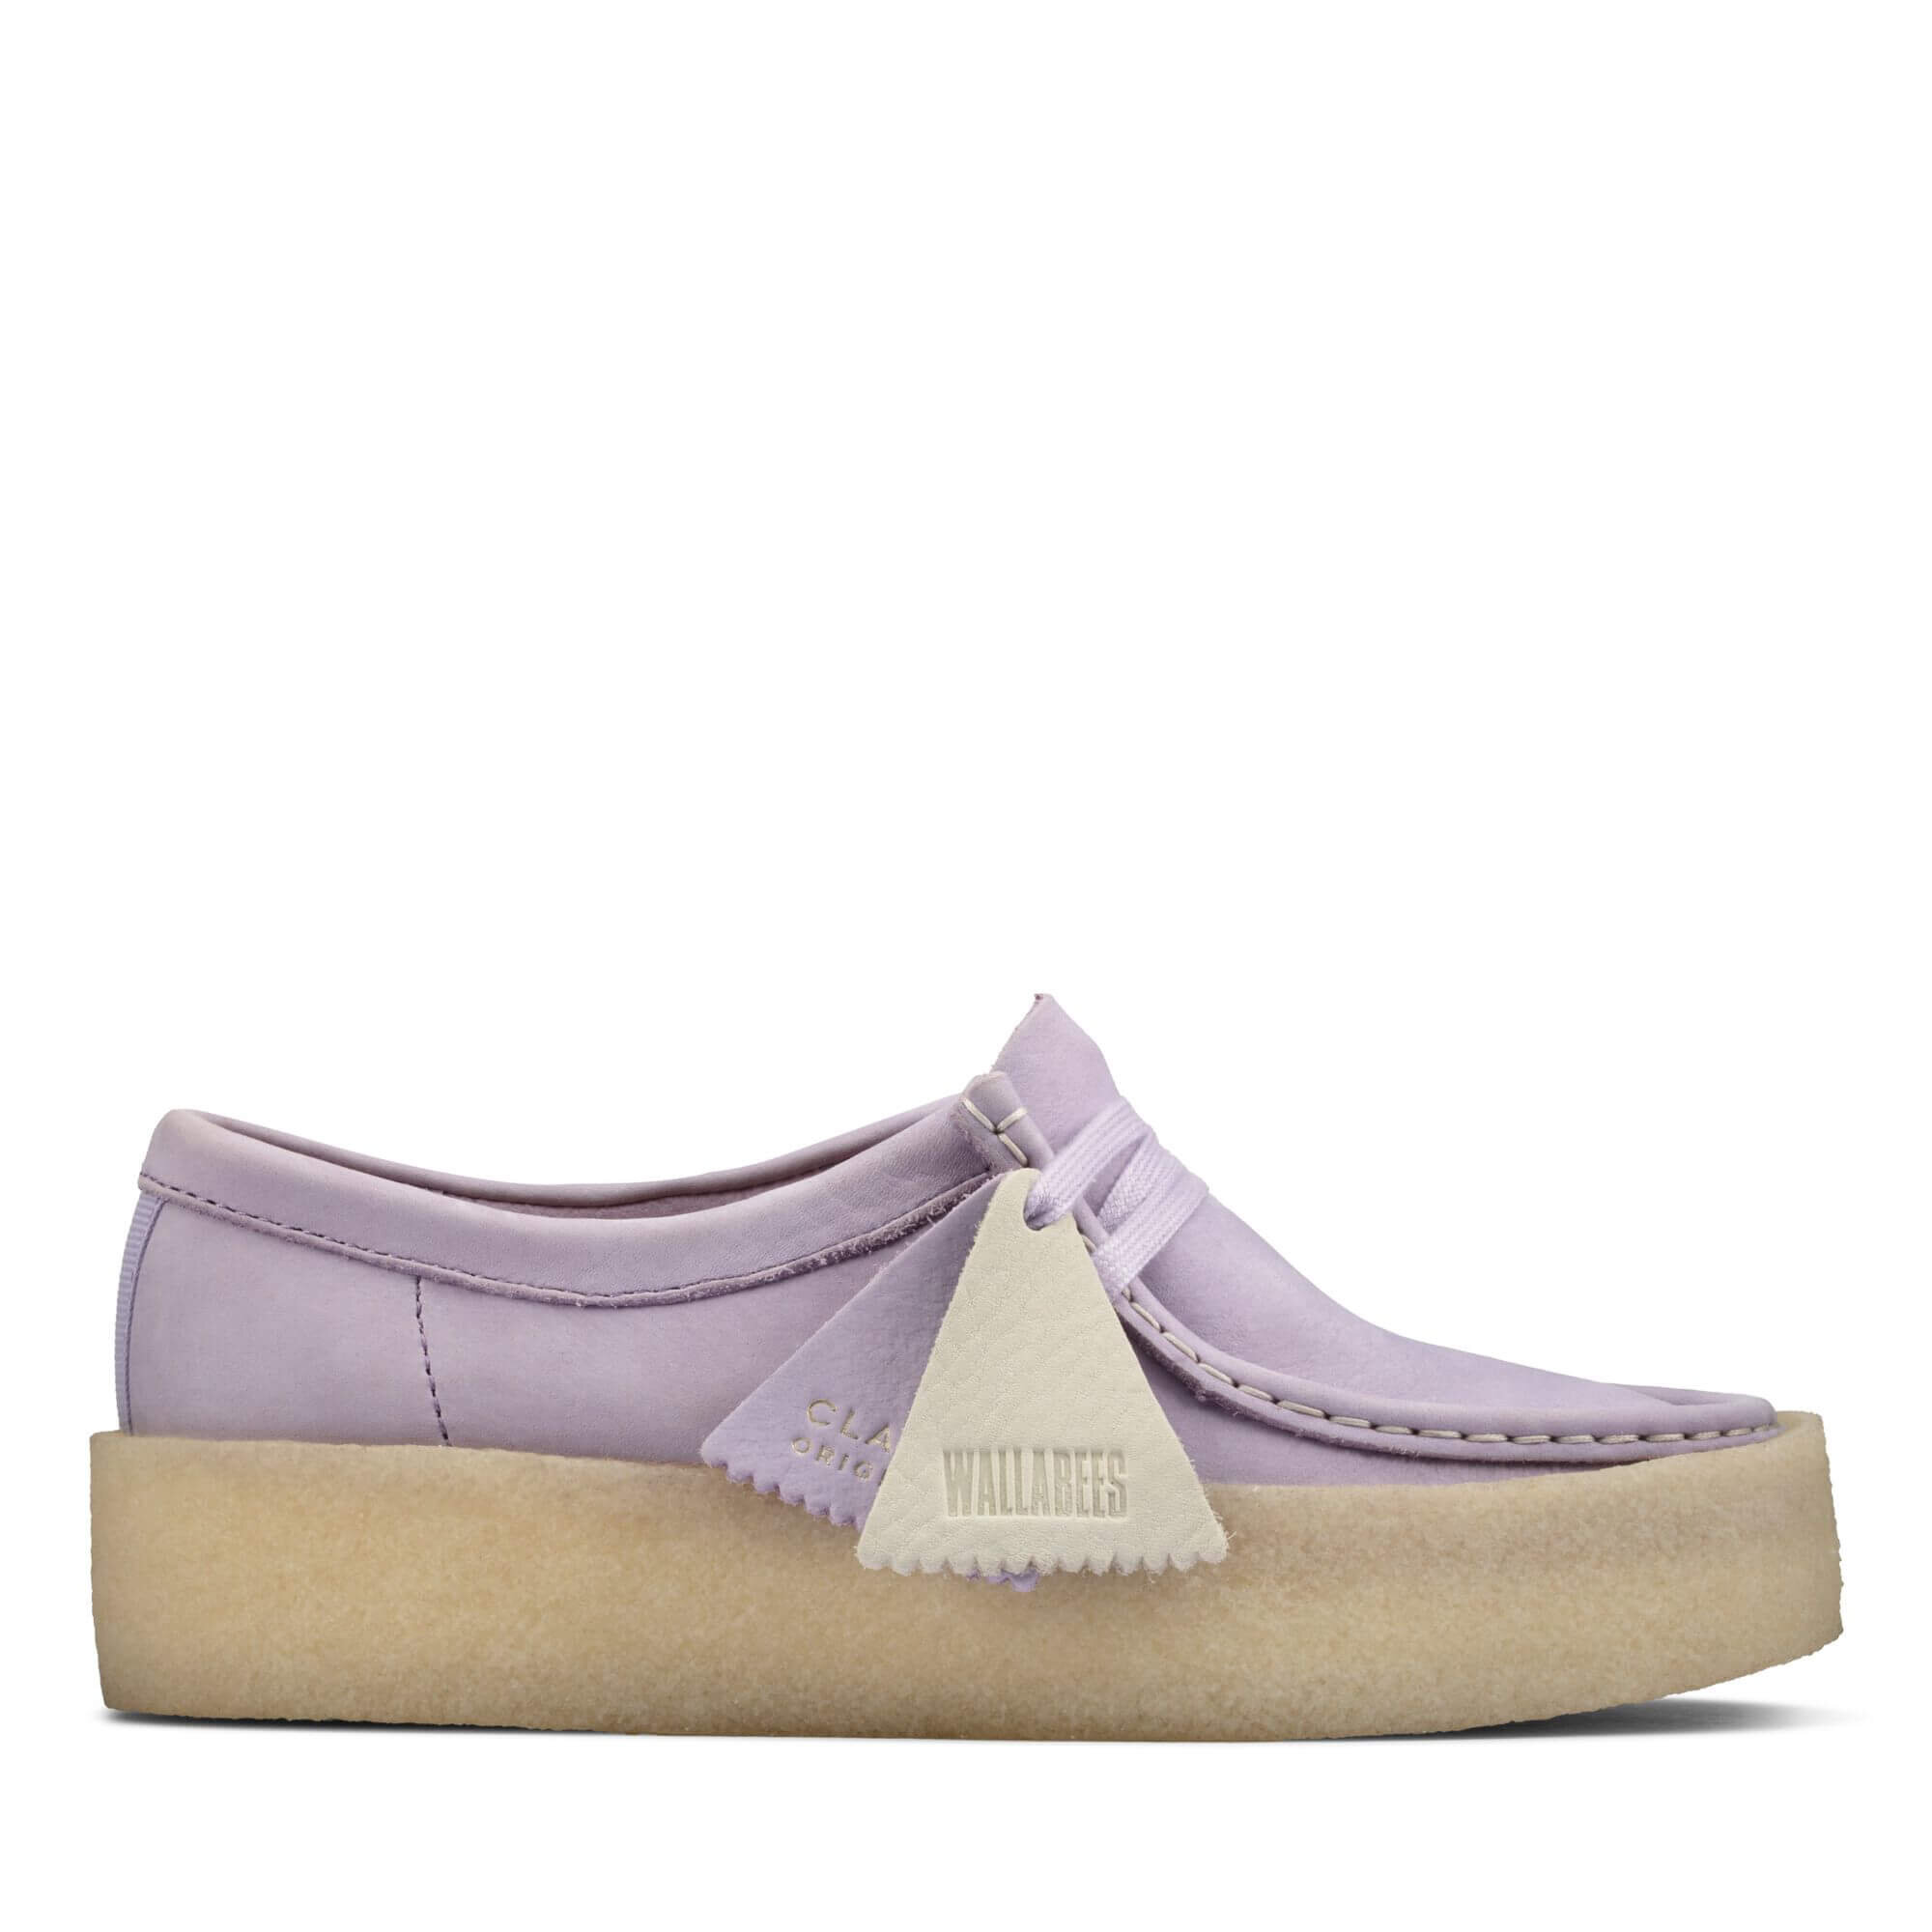 CNK-Clarks-Wallabee-Cup-lilac.jpeg